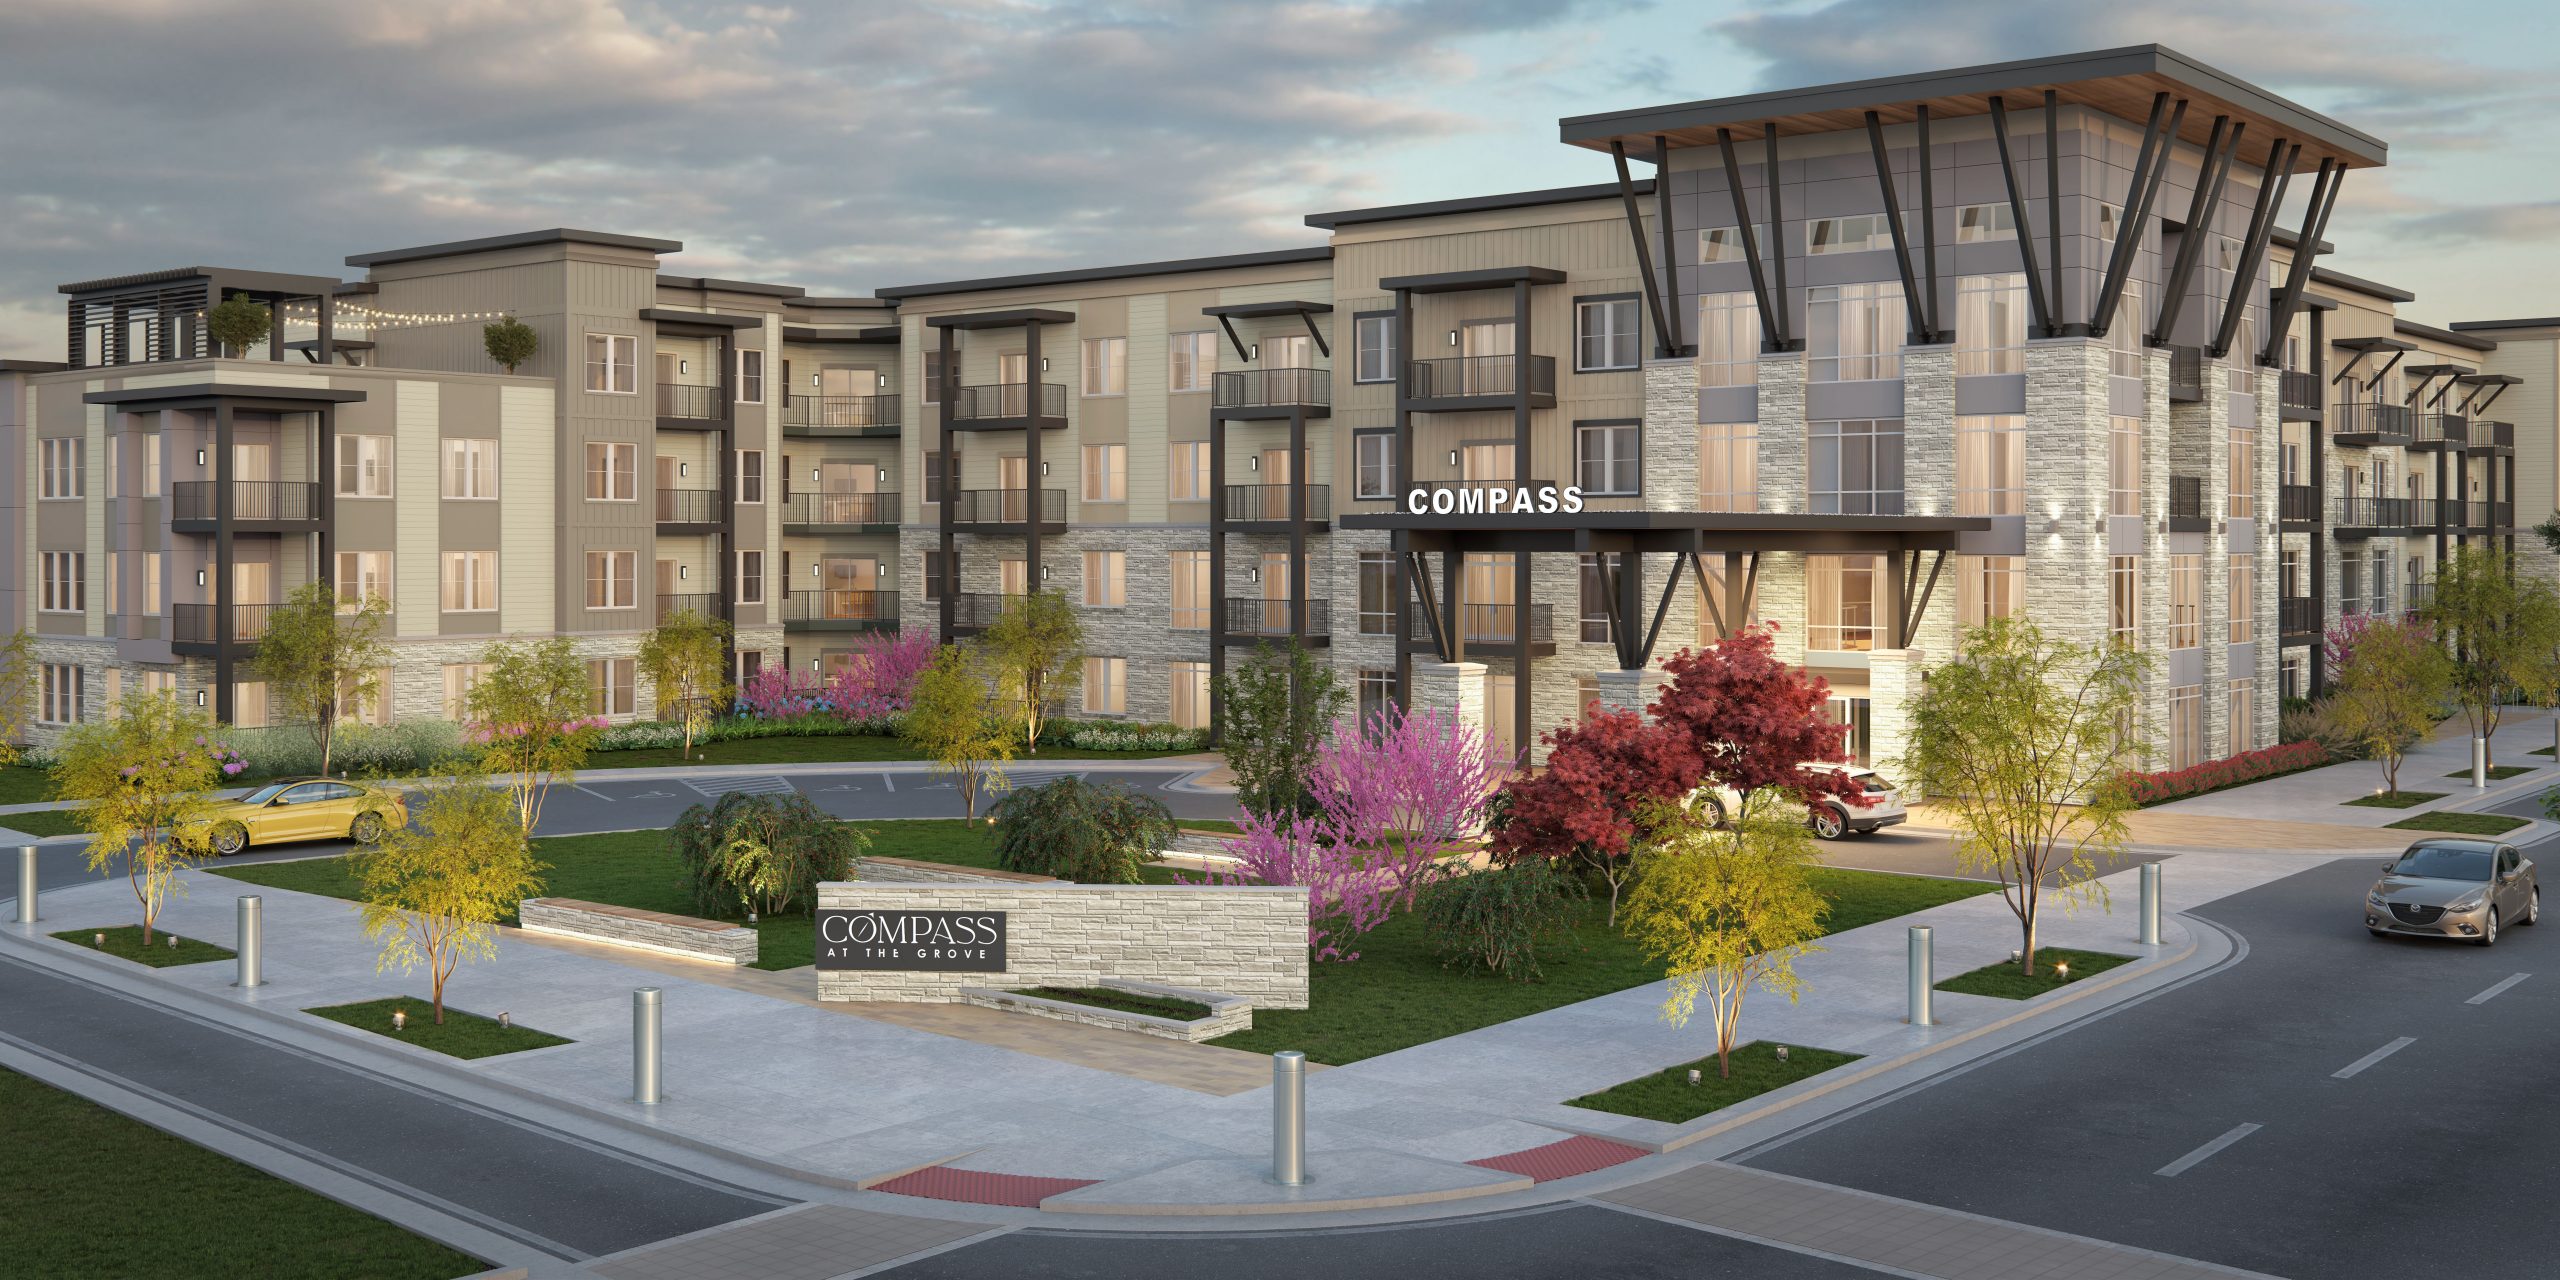 Meet Compass at The Grove: The newest luxury apartments in Newark, DE